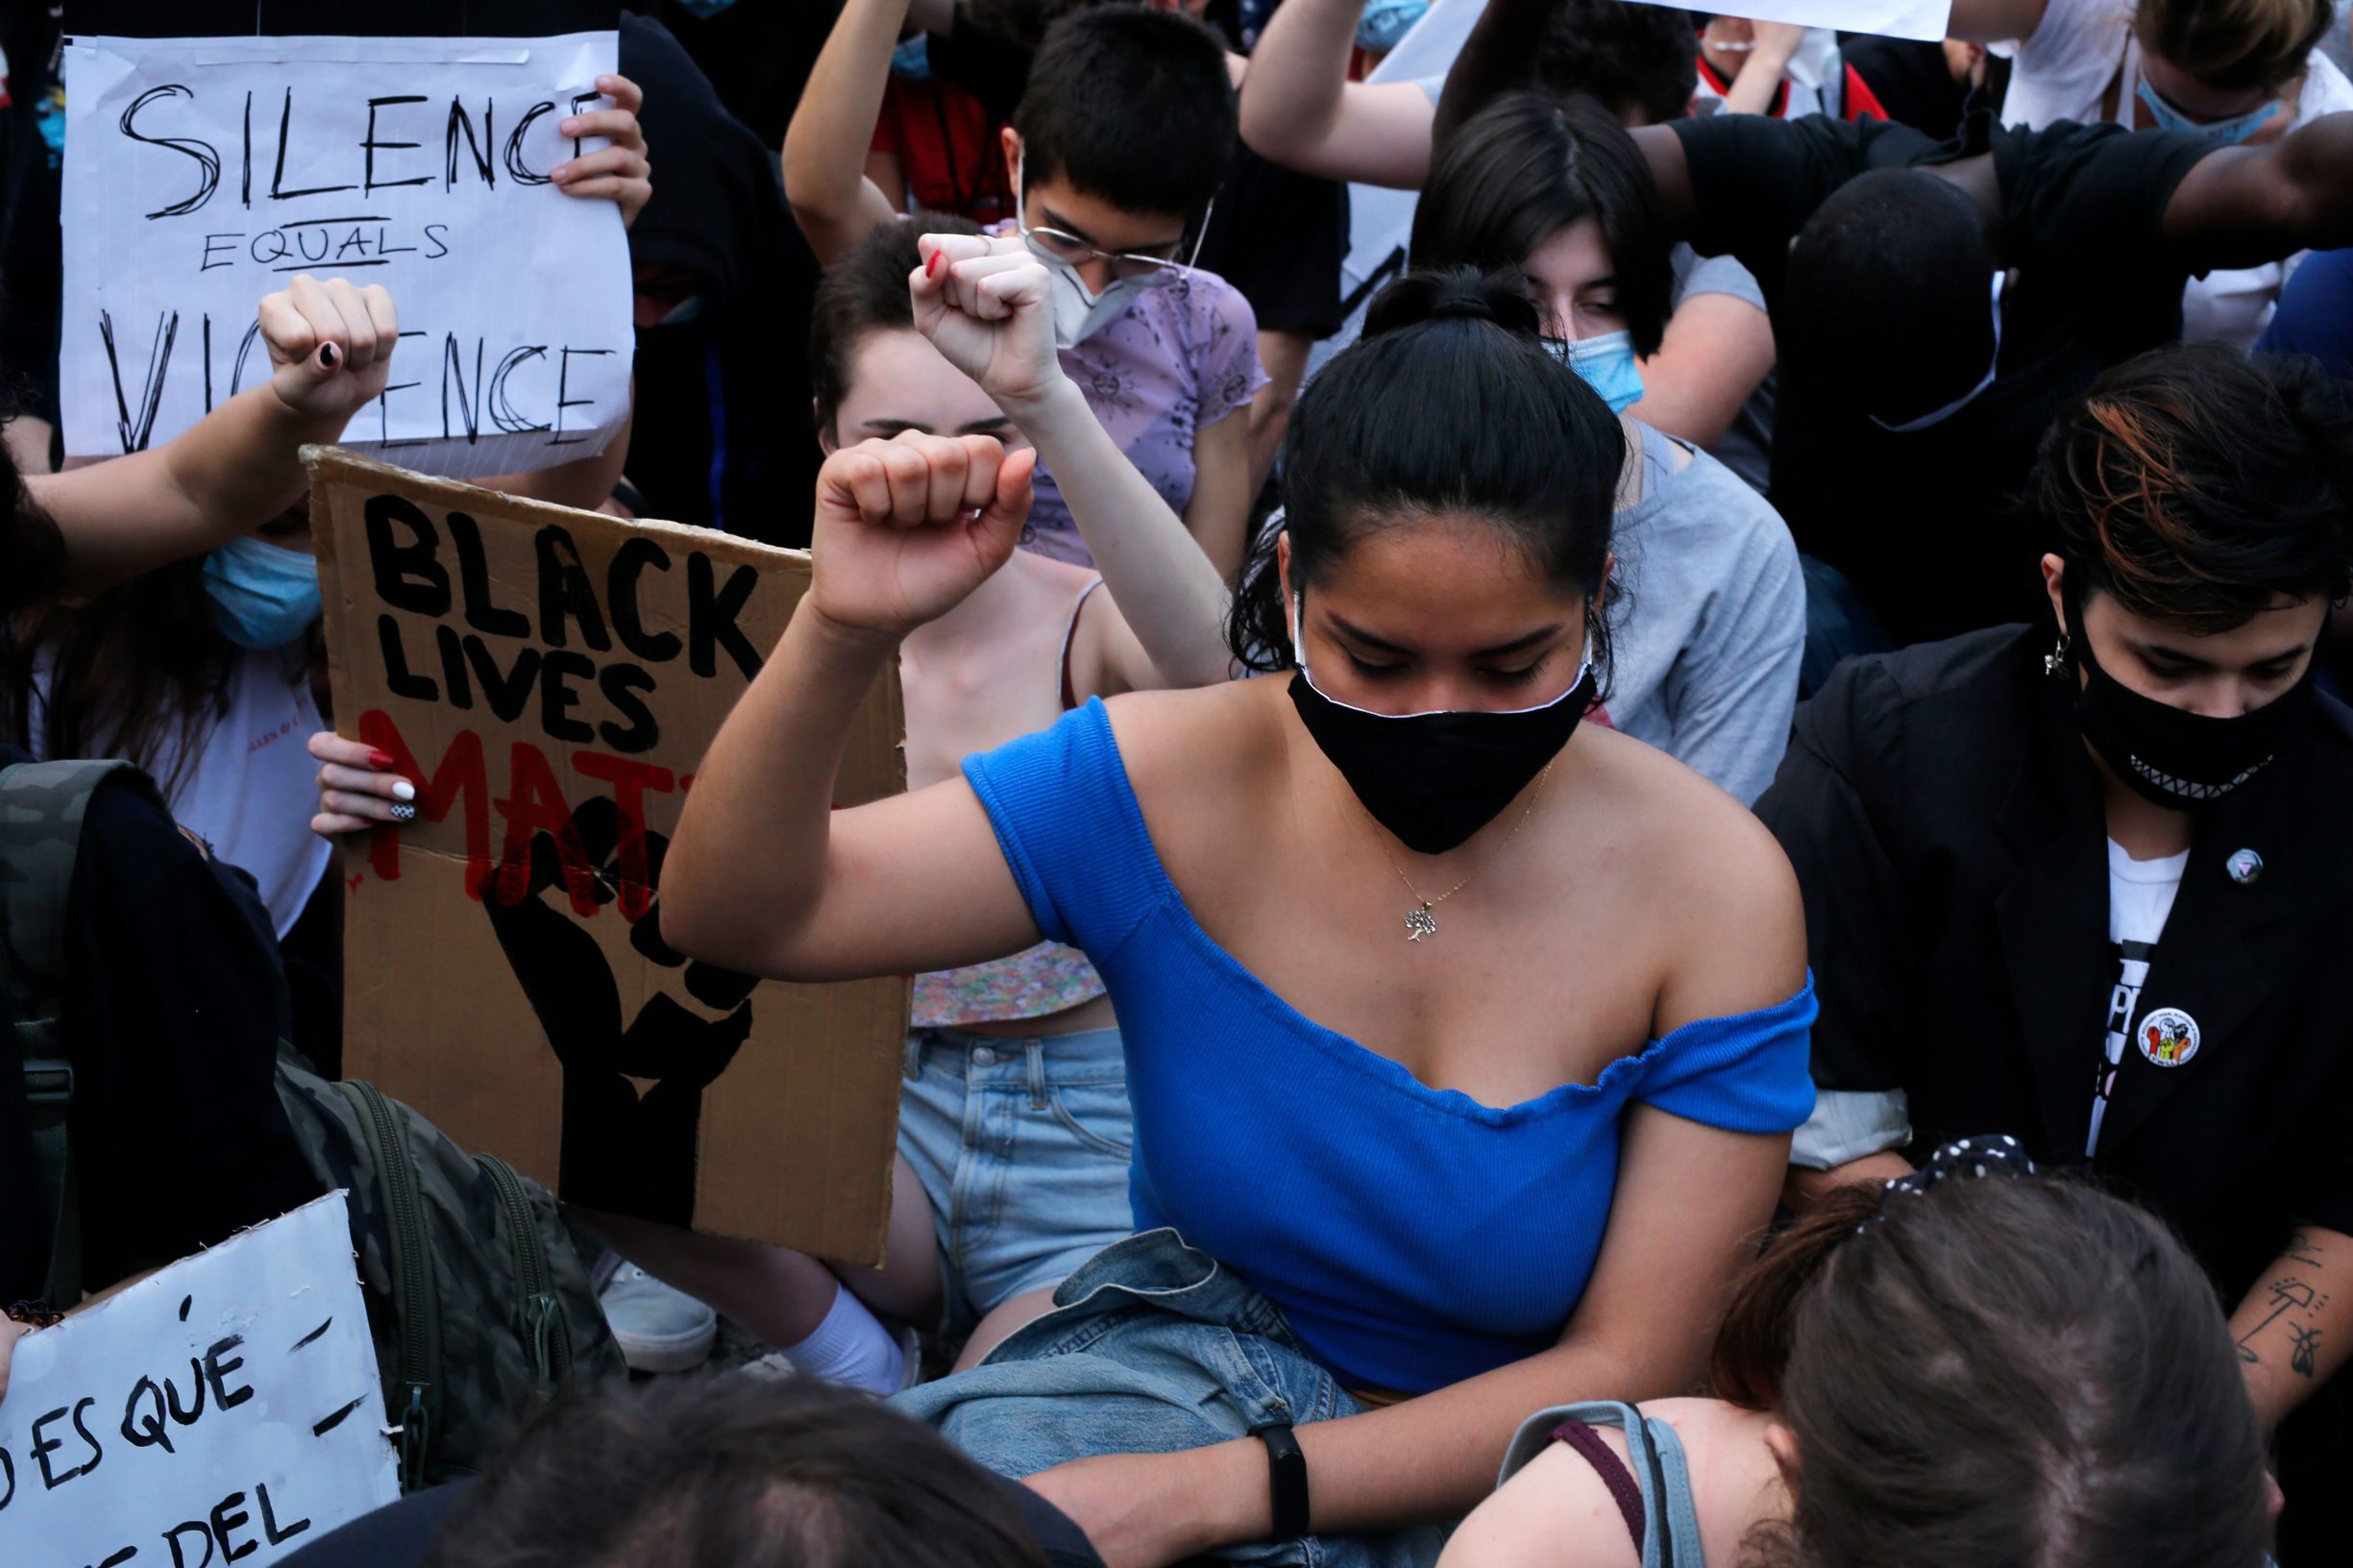 Demonstrators observe a minute of silence at the end of a protest over the police killing of George Floyd in the USA, on June 1, 2020 in Barcelona. - The United States has erupted into days and nights of protests, violence, and looting, following the death of George Floyd after he was detained and held down by a knee to his neck, dying shortly after. (Photo by Pau Barrena / AFP)